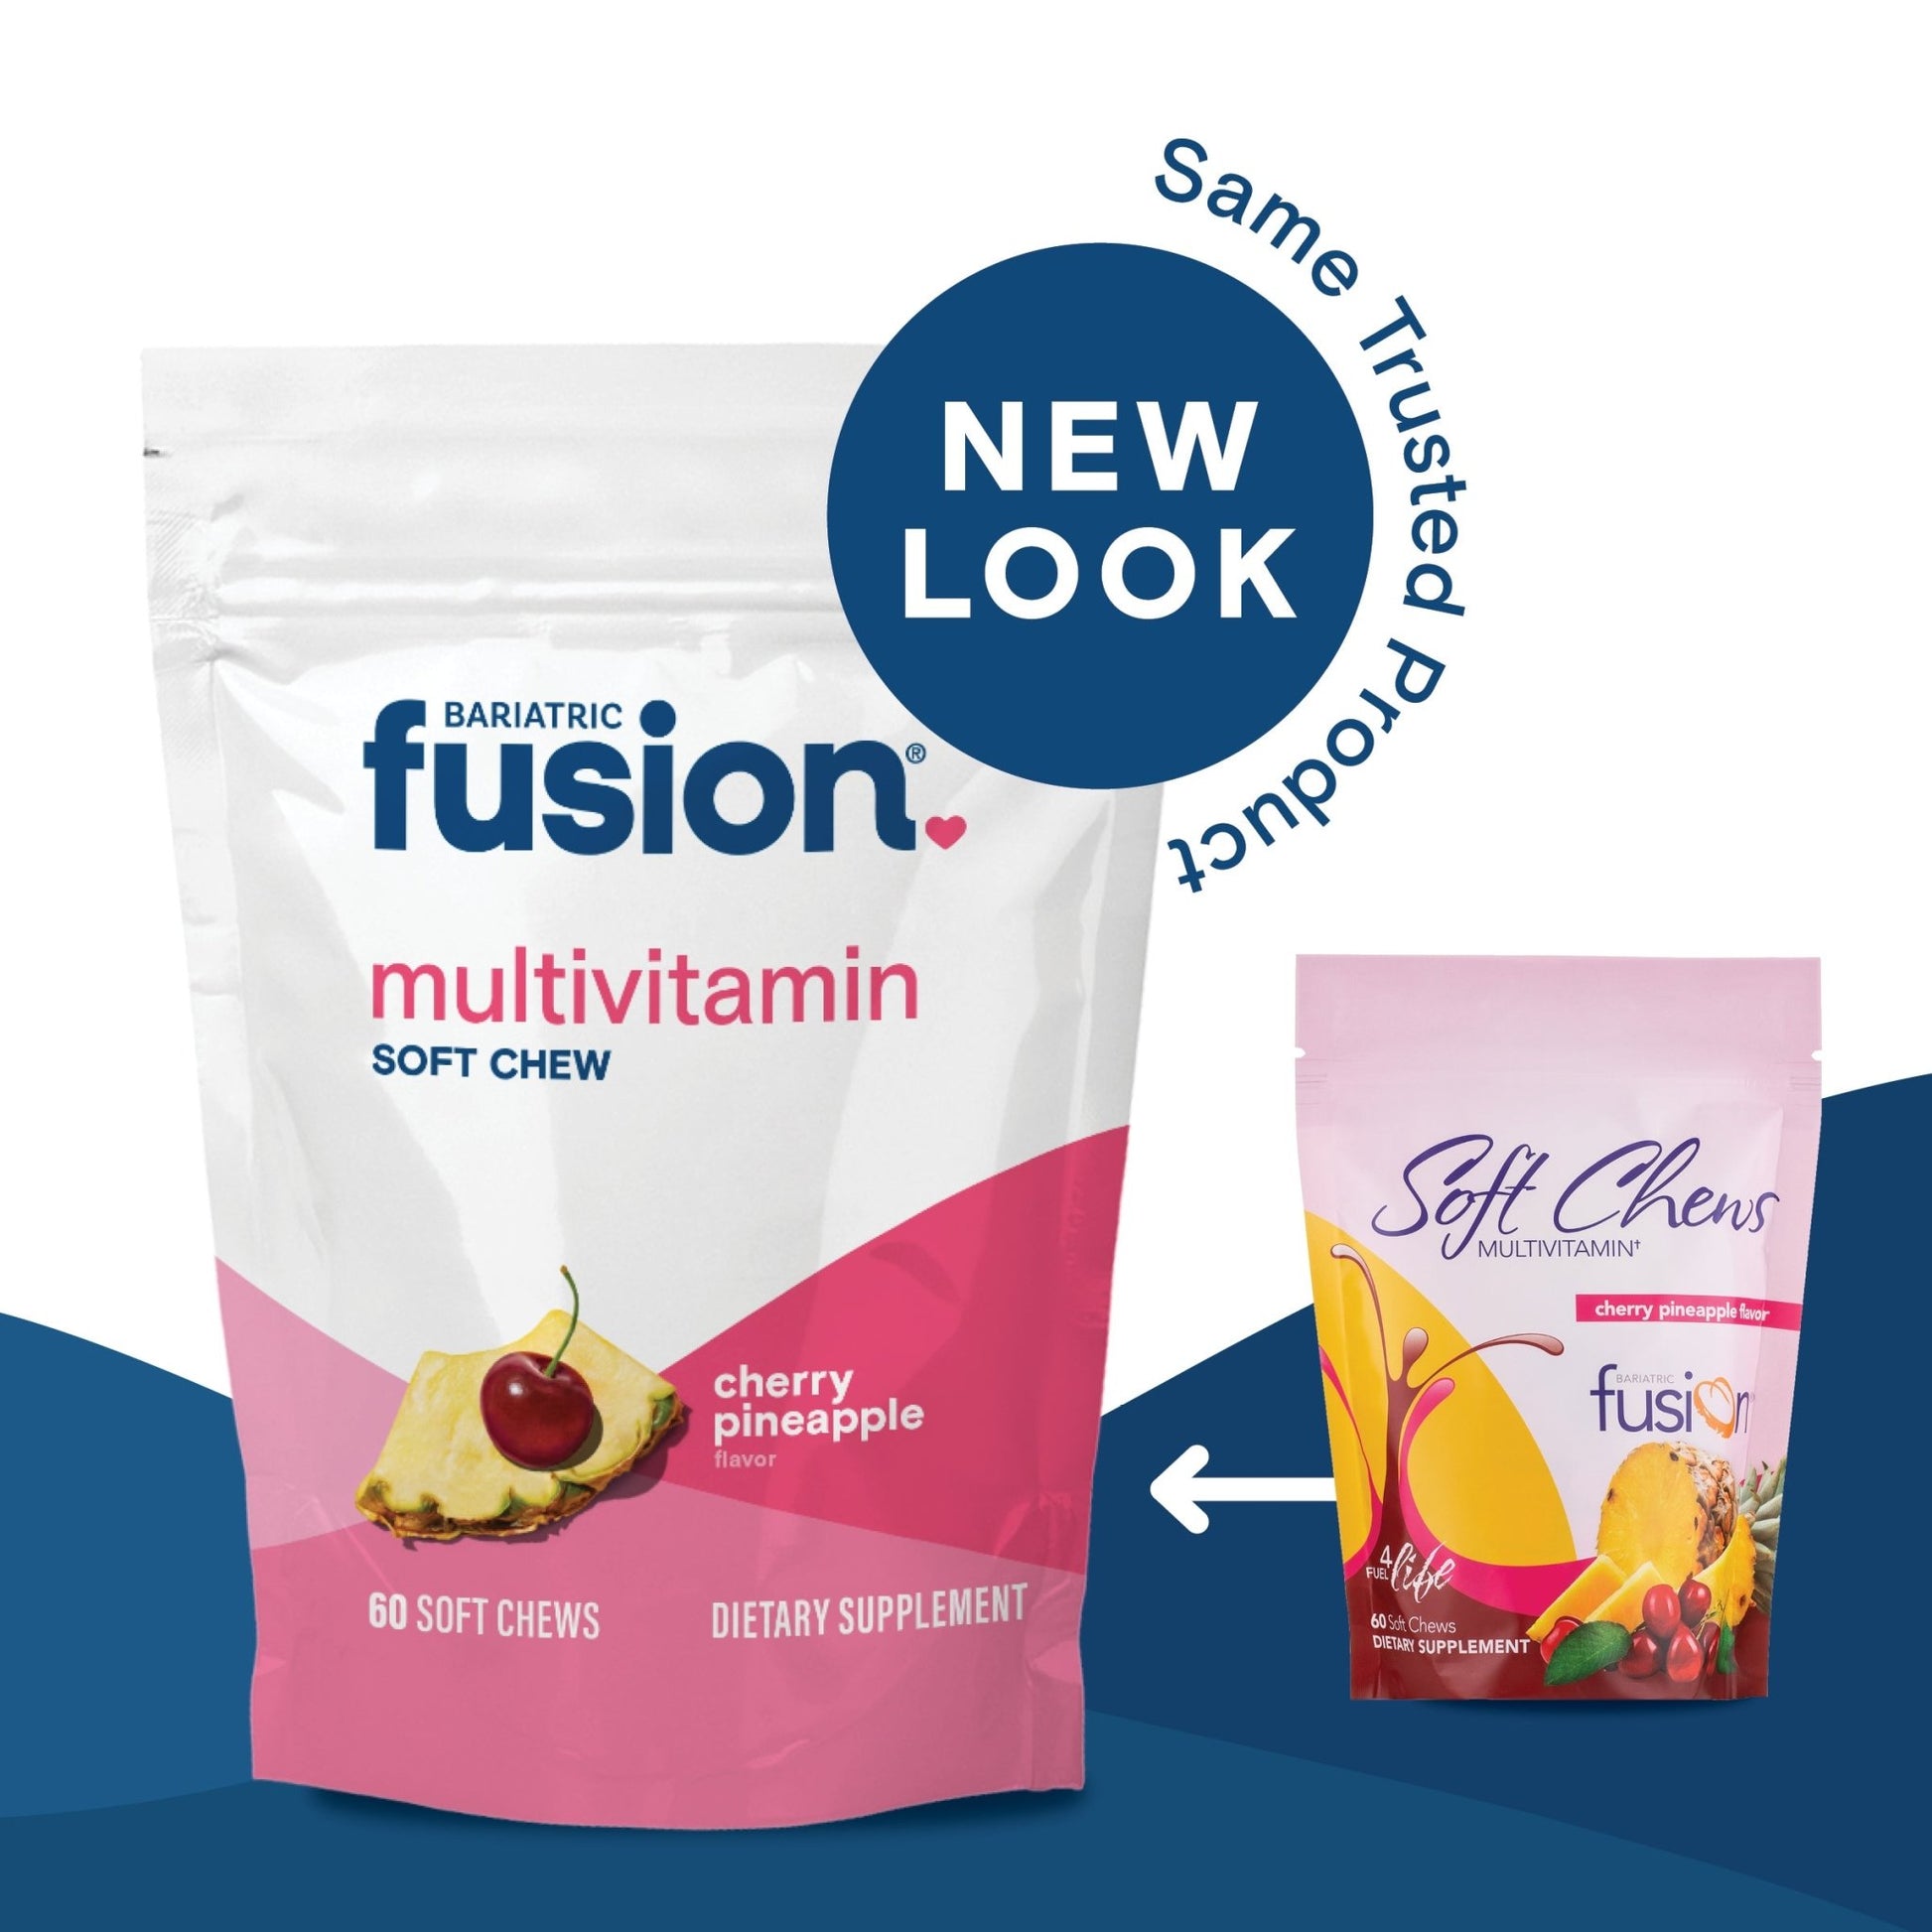 Bariatric Fusion Cherry Pineapple Bariatric Multivitamin Soft Chews new look, same trusted product.